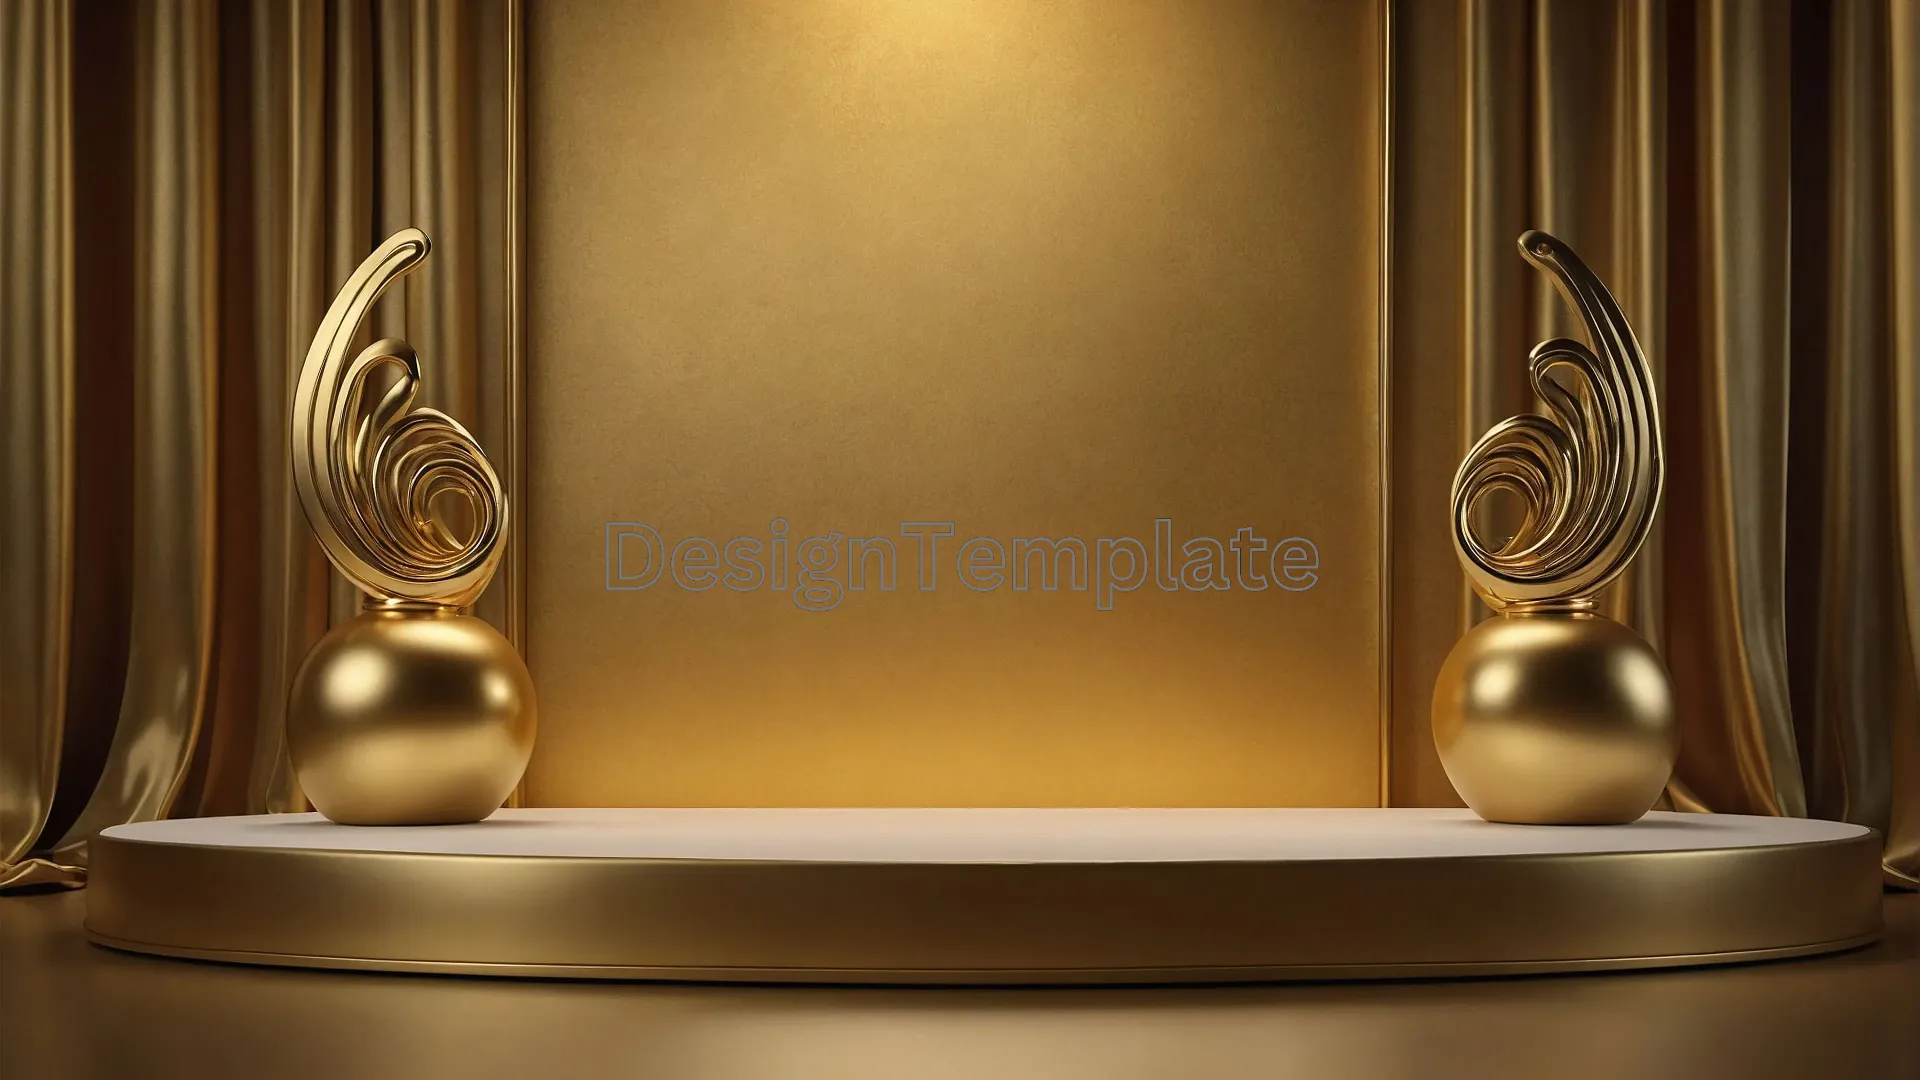 Award Show Stage with Luxurious Golden Podium and Curtains Image